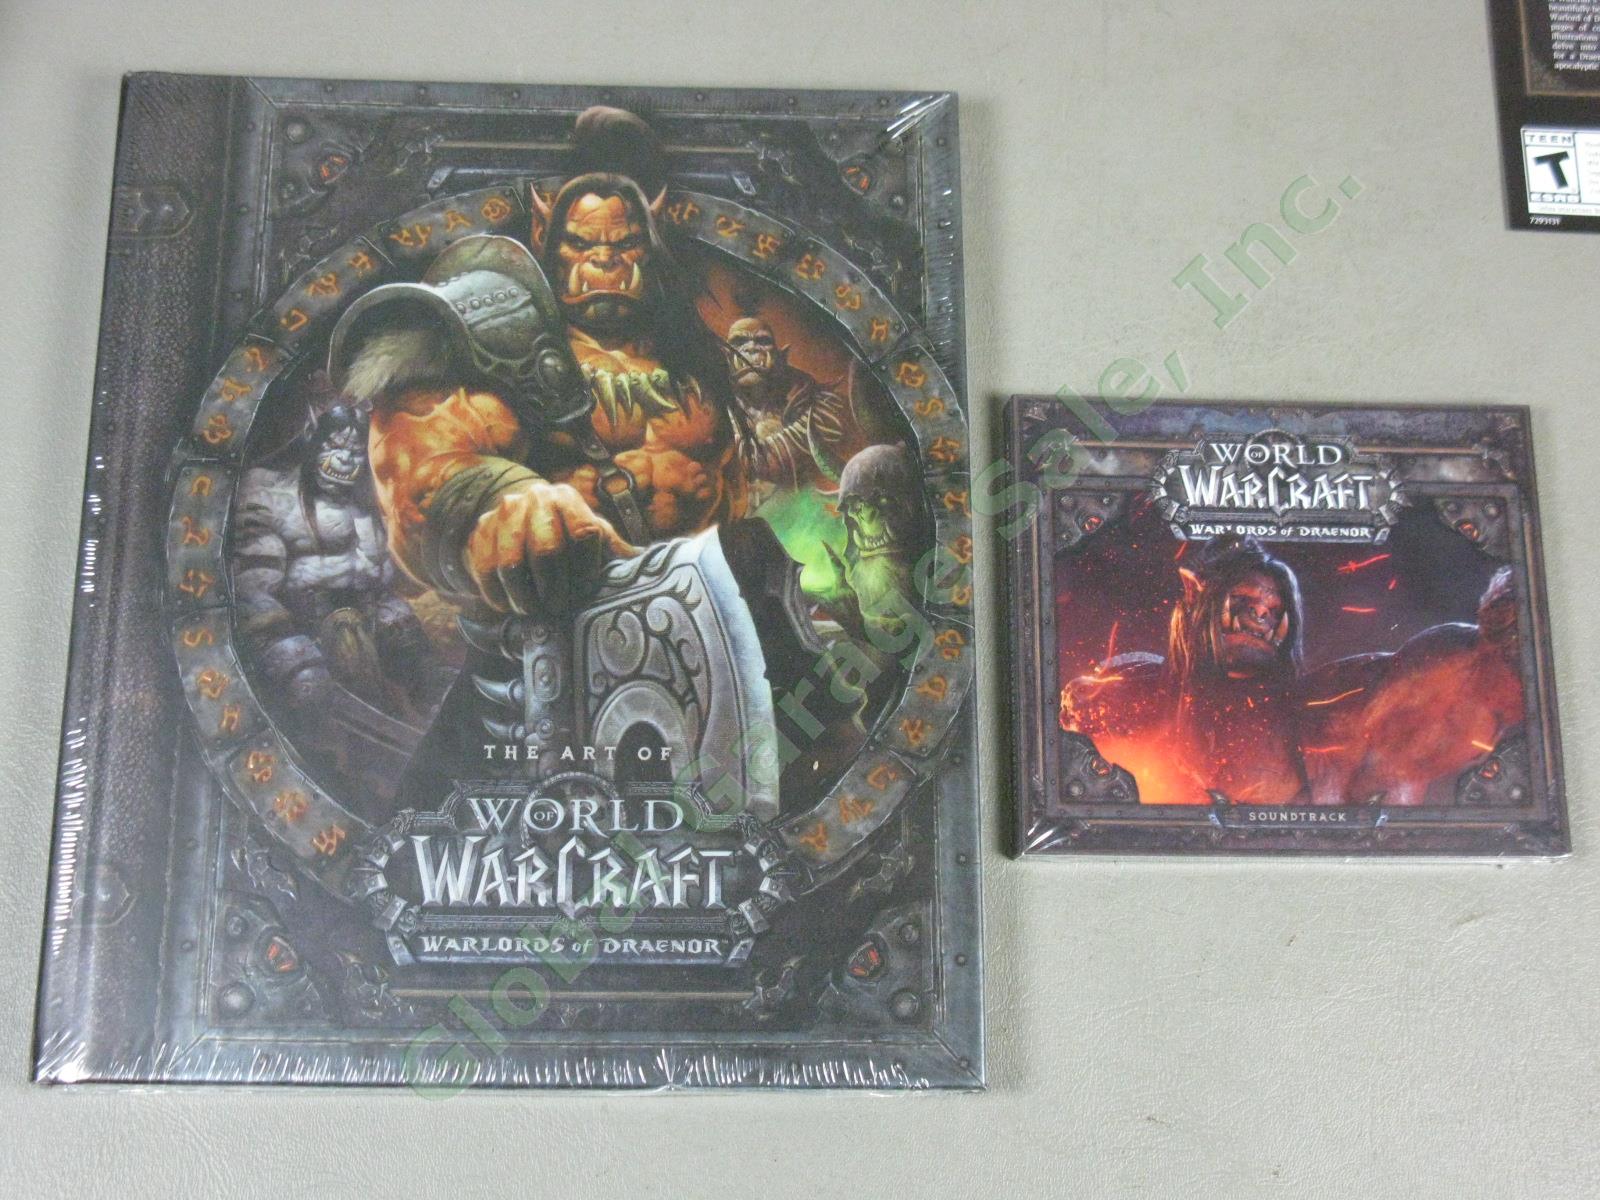 World Of Warcraft Warlords Of Draenor Collectors Edition Sealed Book CD DVD NR! 4